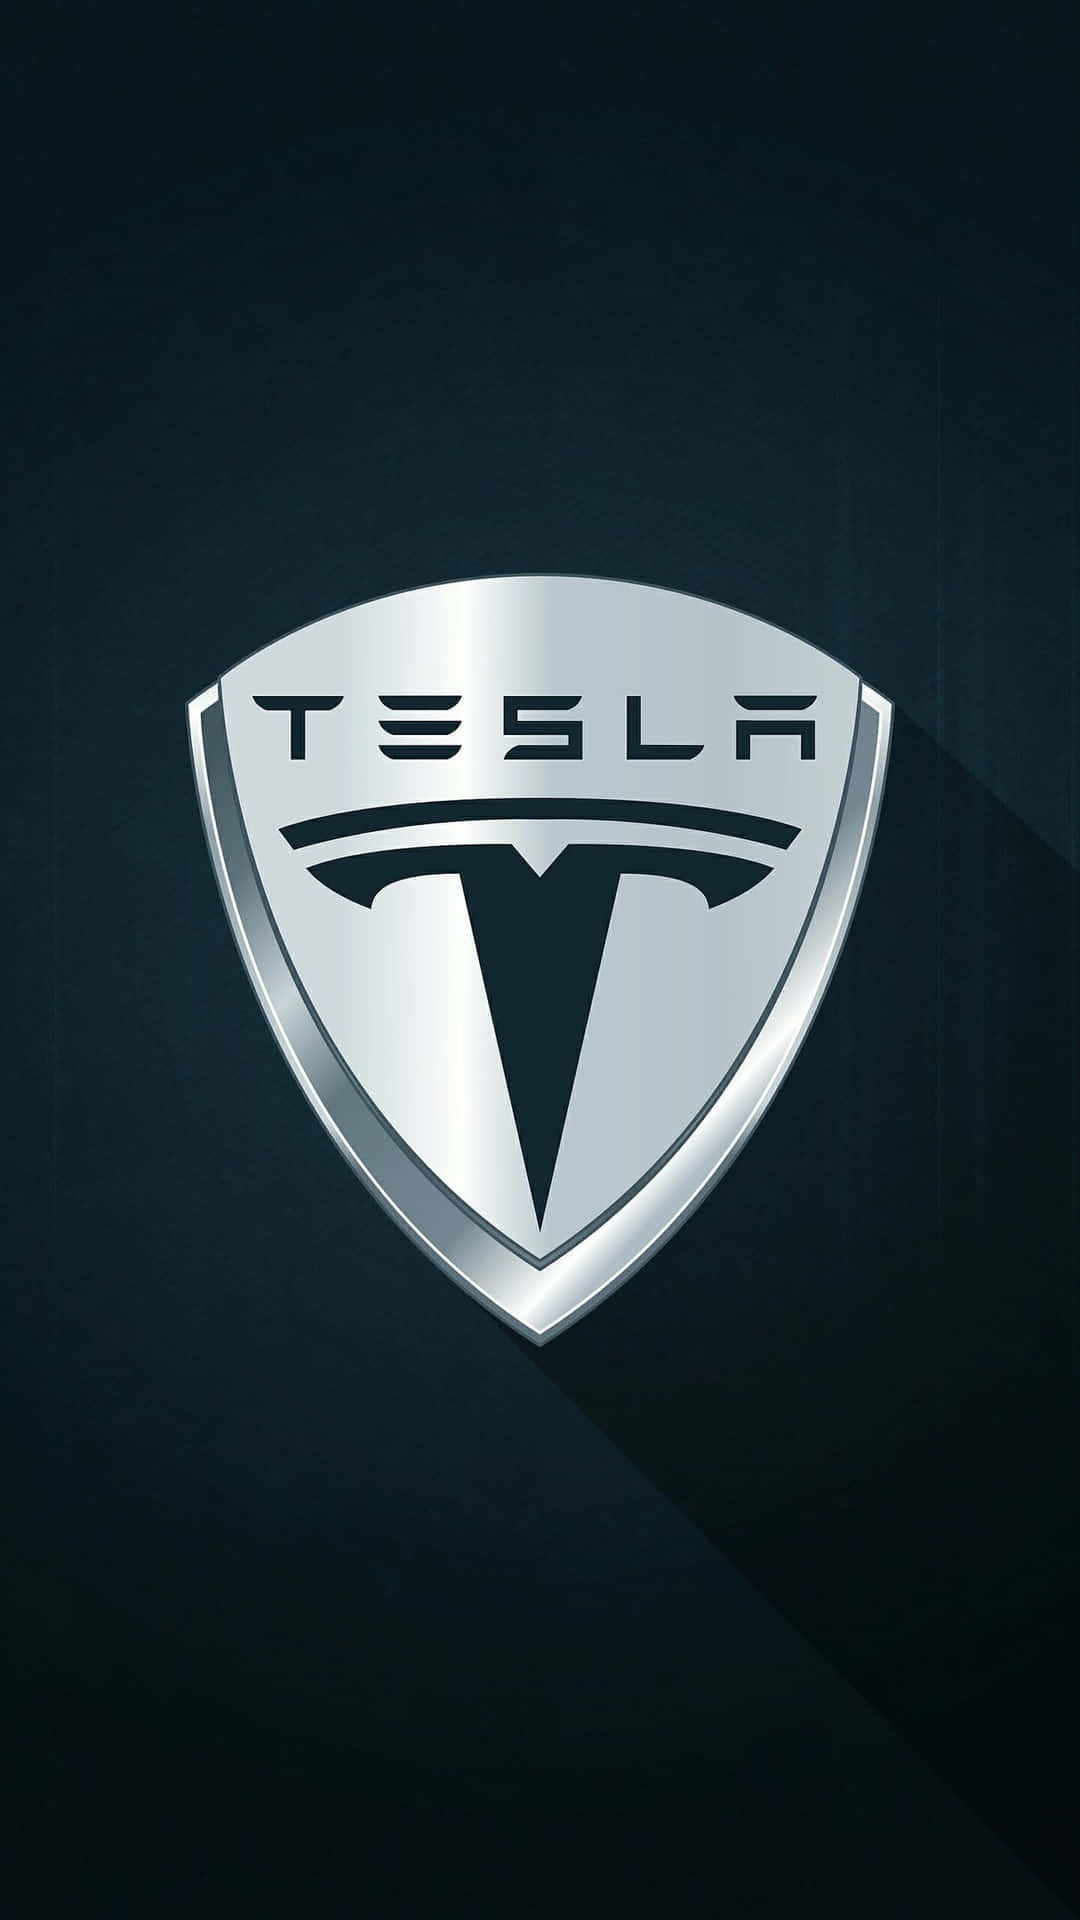 Get ready to take your phone to higher speeds with Tesla iPhone Wallpaper